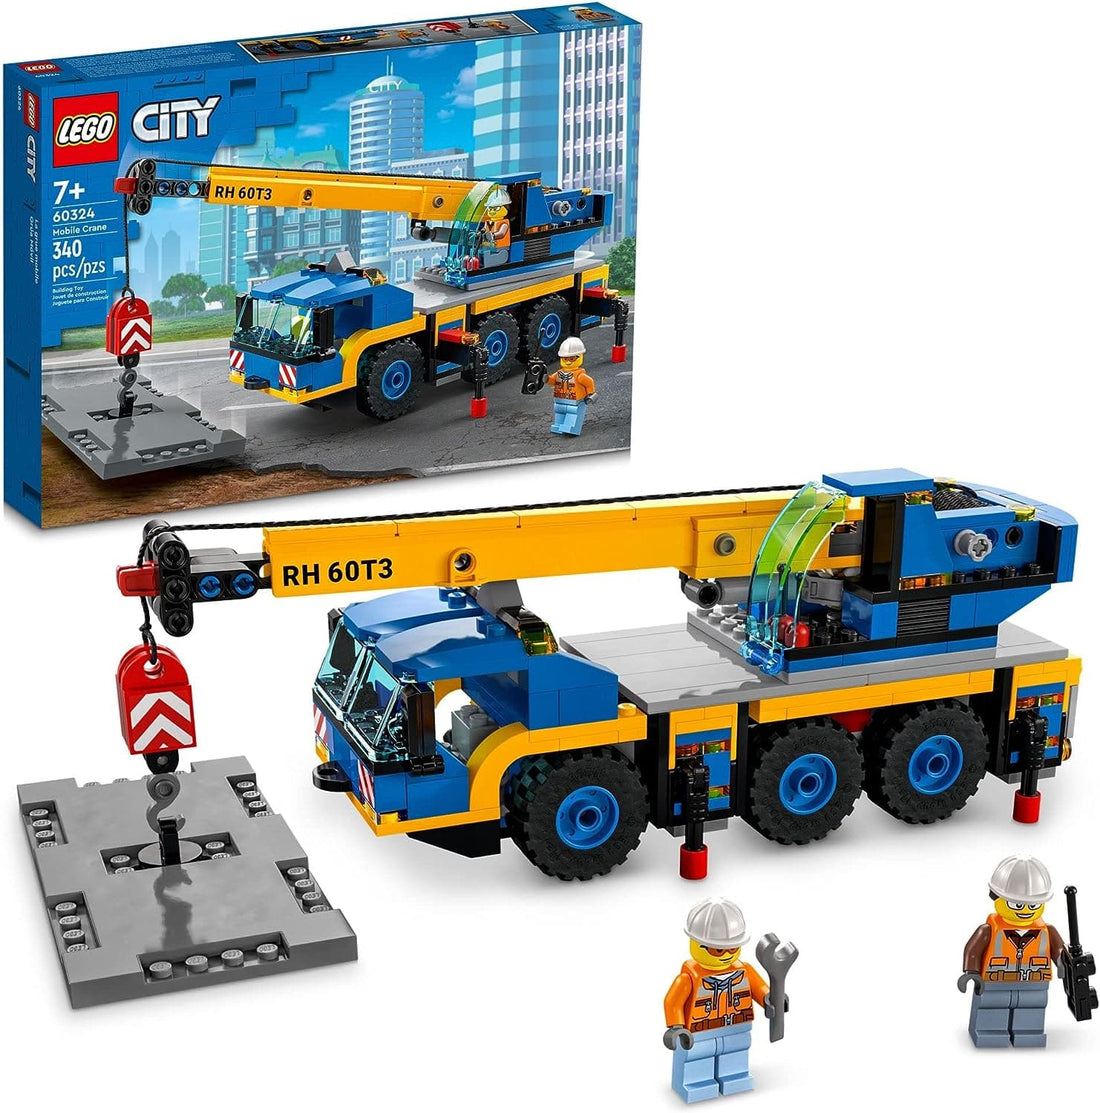 LEGO City Great Vehicles Mobile Crane Truck Toy Building Set Featuring 2 Minifigures with Tool Toys Kit and Road Plate - best price from Maltashopper.com 60324